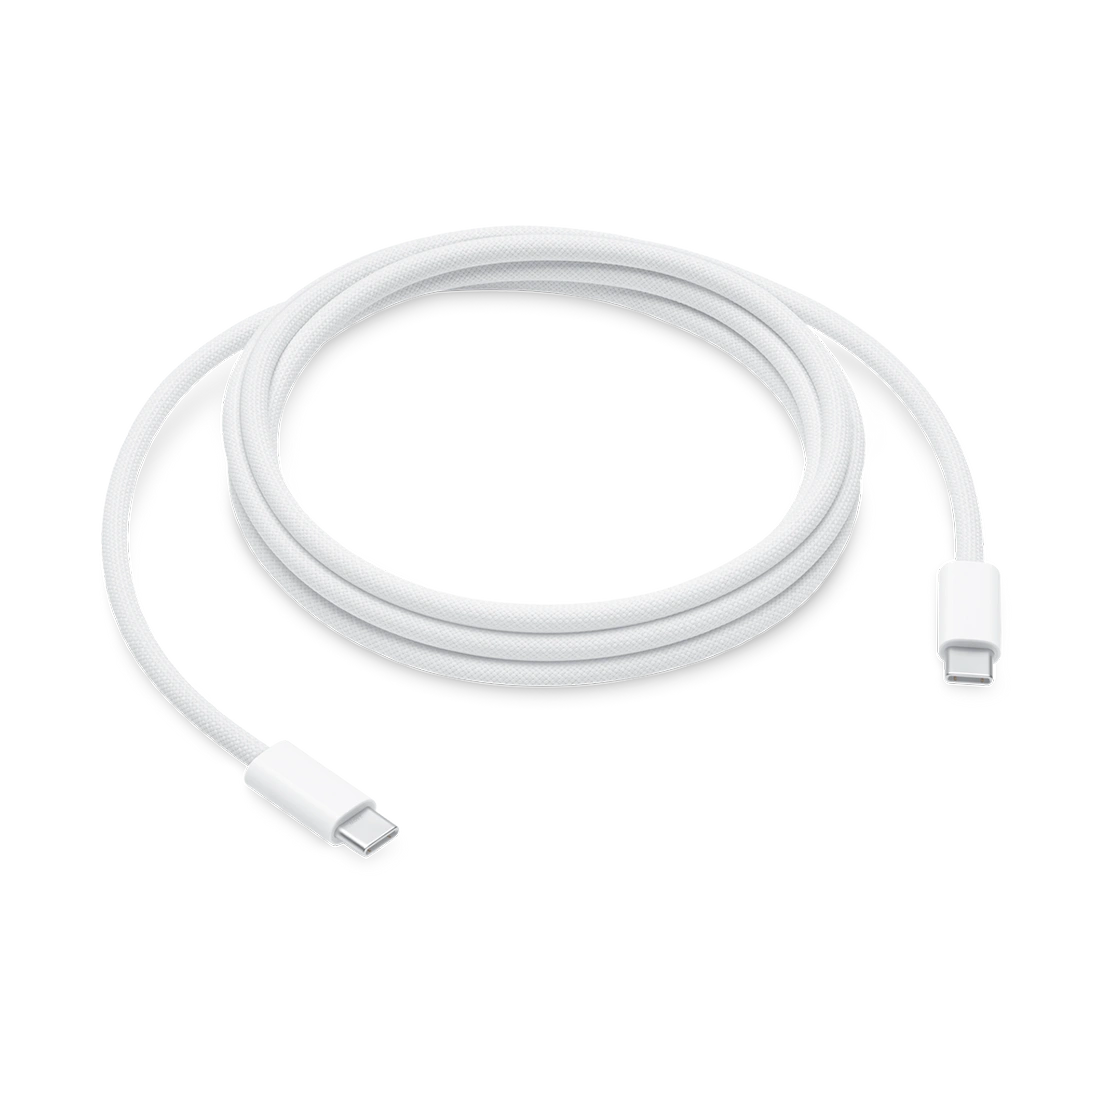 Apple 240W USB-C Charge Cable 2m